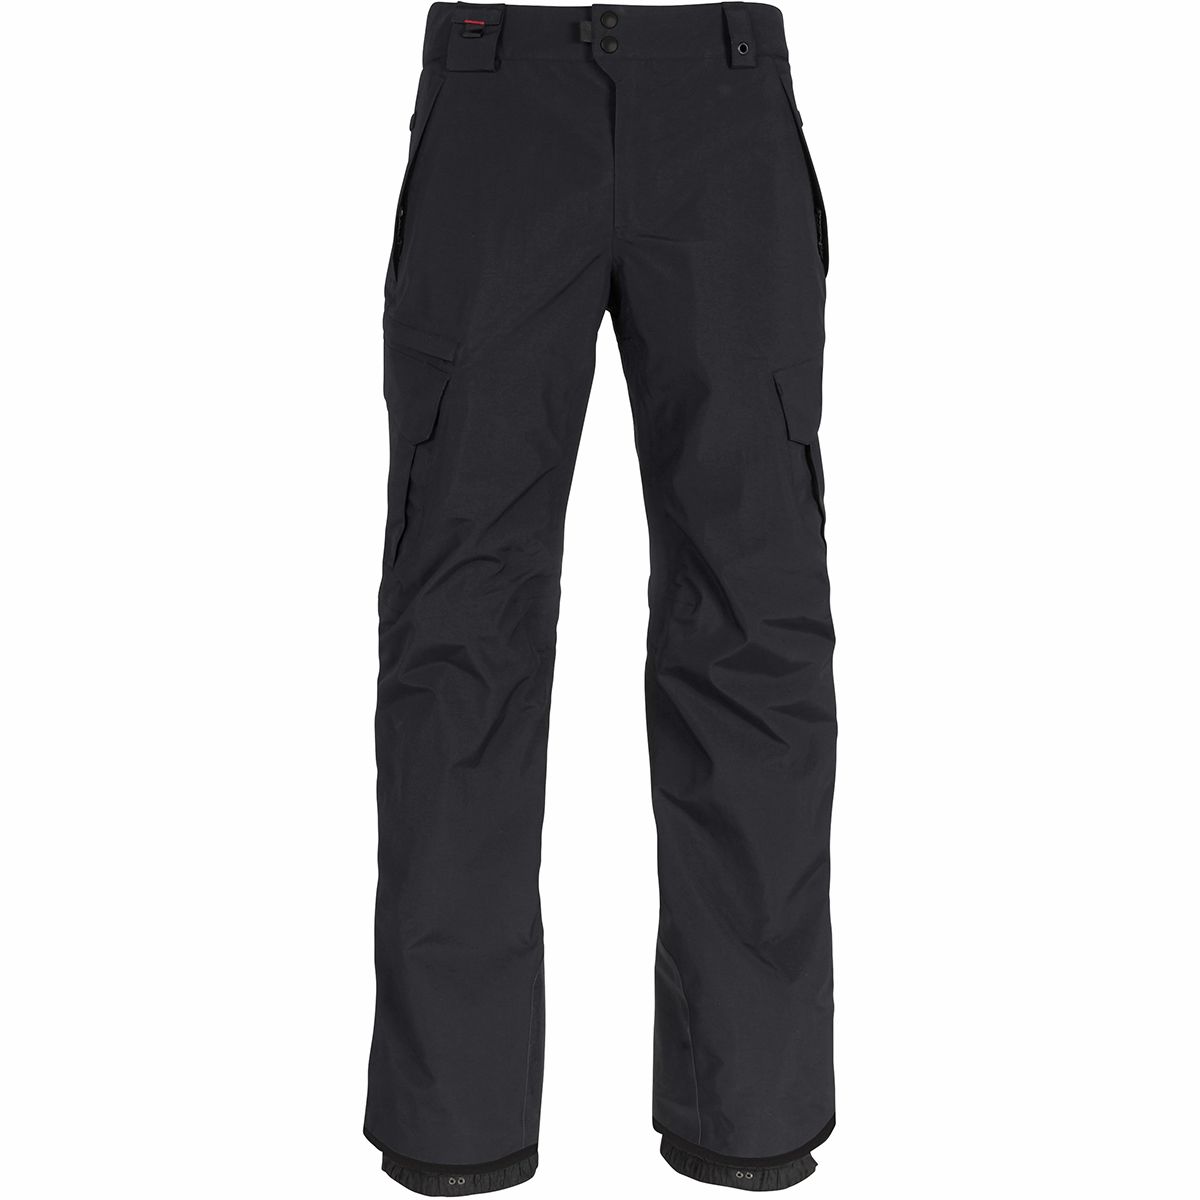 686 Smarty Cargo 3-In-1 Pant - Men's | Backcountry.com